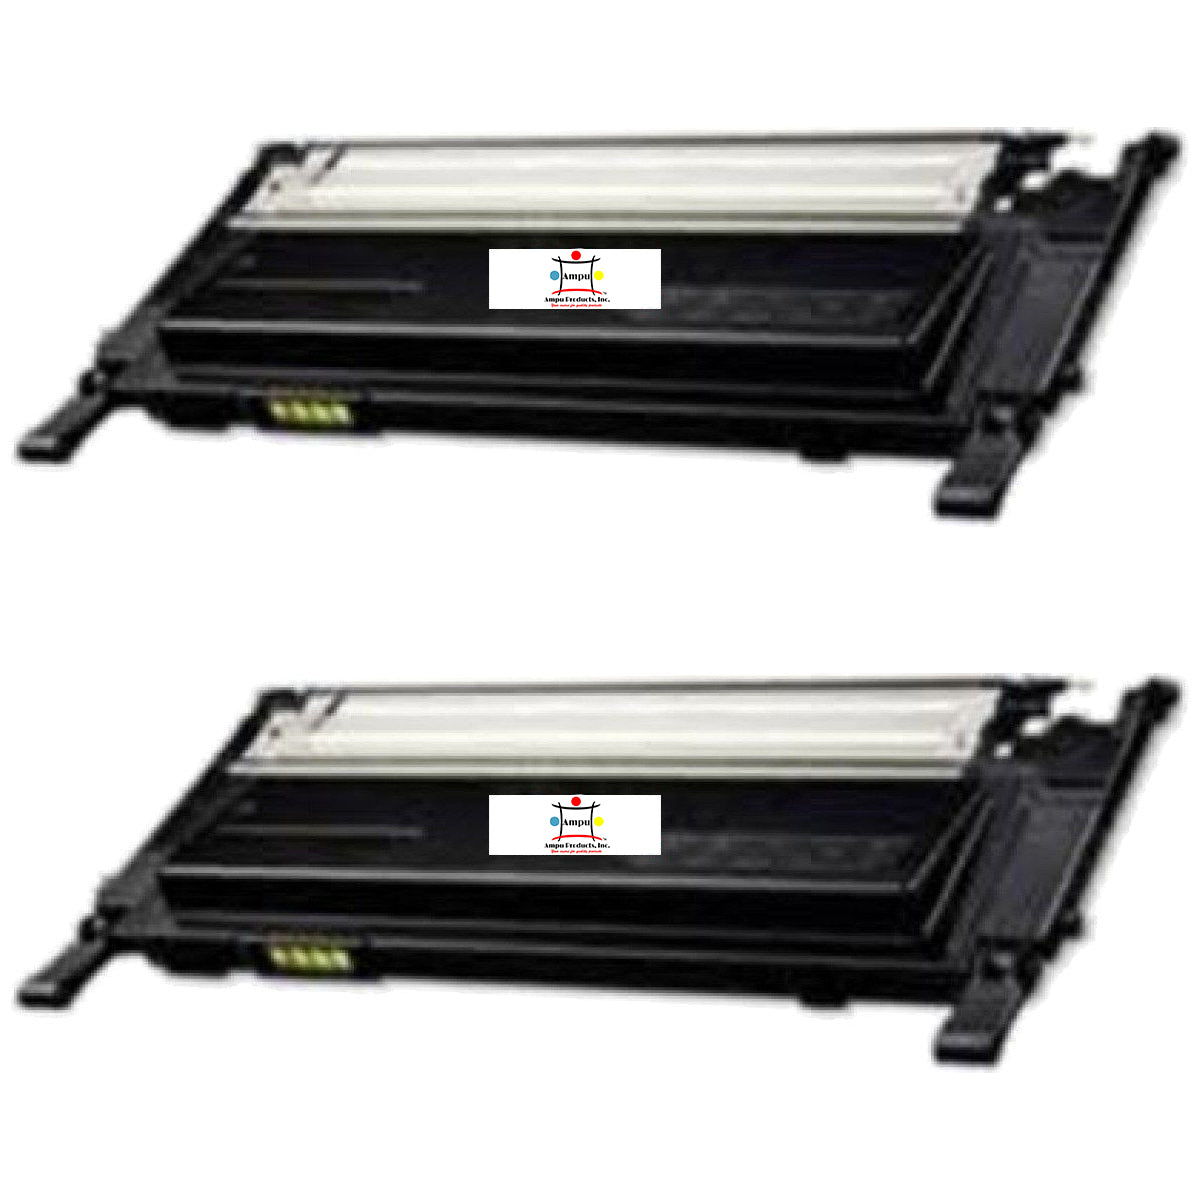 Compatible Toner Cartridge Replacement For SAMSUNG CLT-K407S (CLTK407S) Black (1.5K YLD) 2-Pack